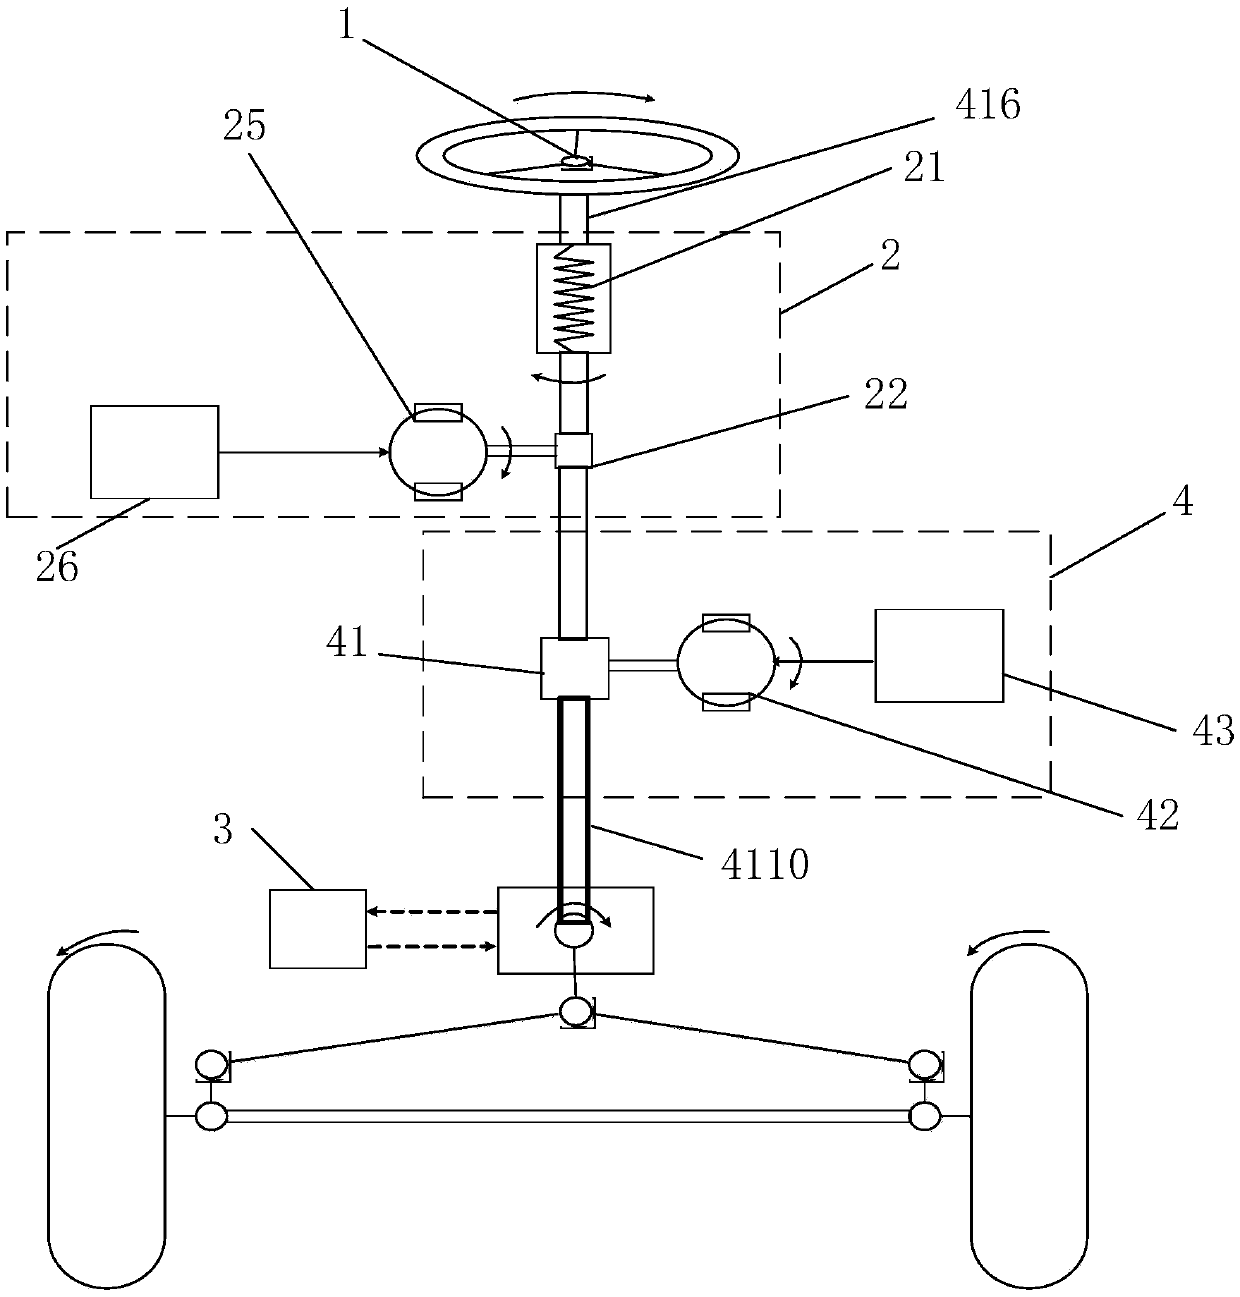 Active electro-hydraulic coupling steering system and vehicle